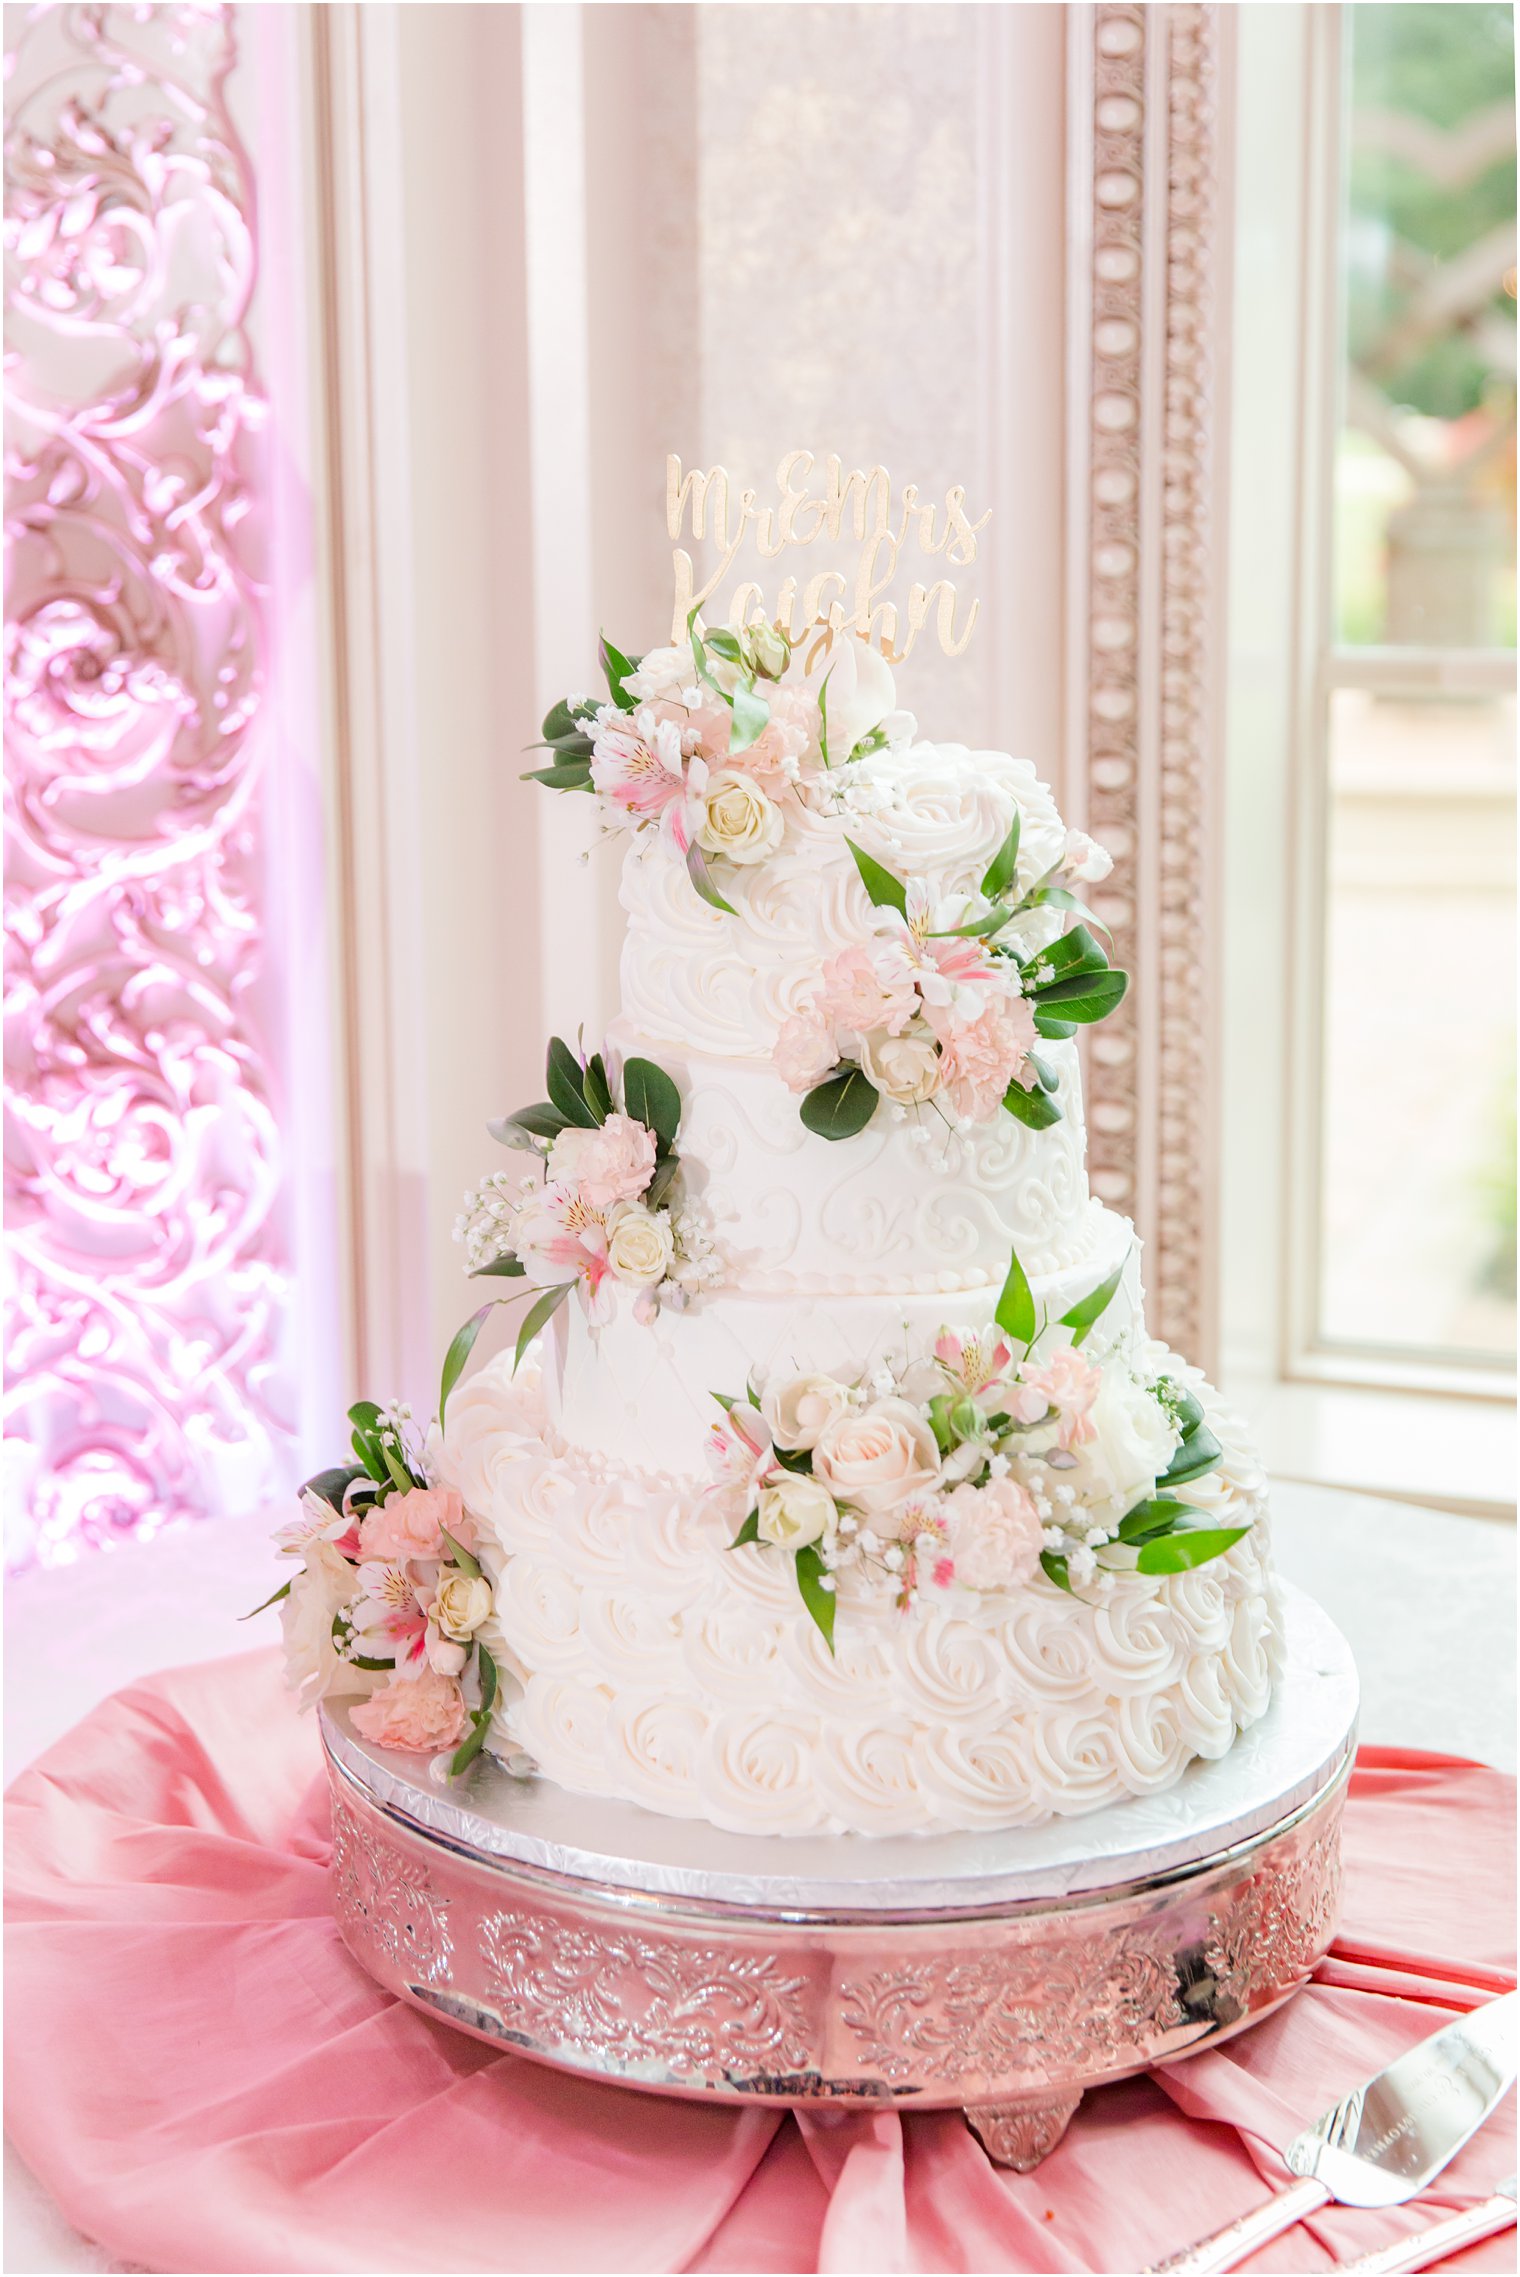 tiered wedding cake with pale pink flower accents for NJ wedding reception 